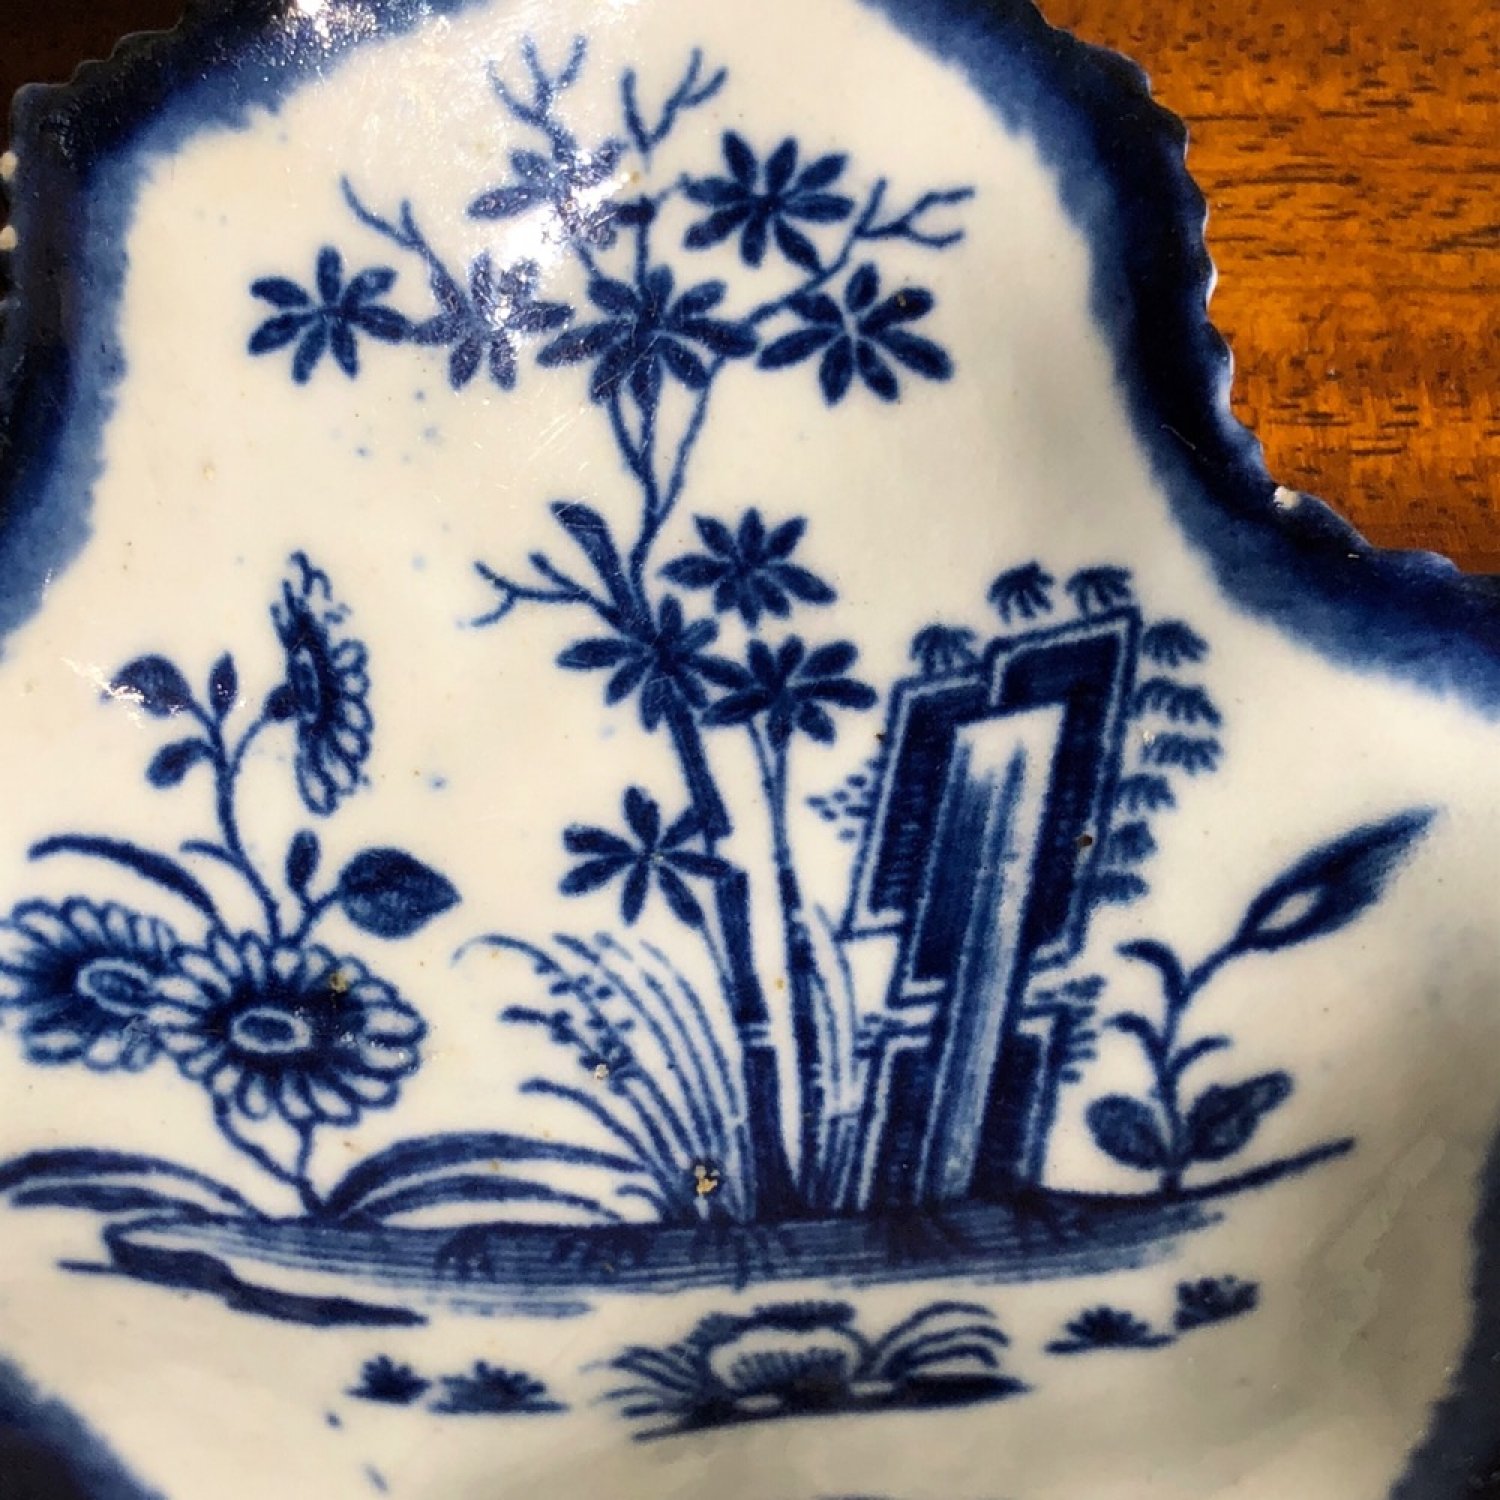 Rare Worcester blue and white pickle, ‘Bamboo Billboards’ c.1757